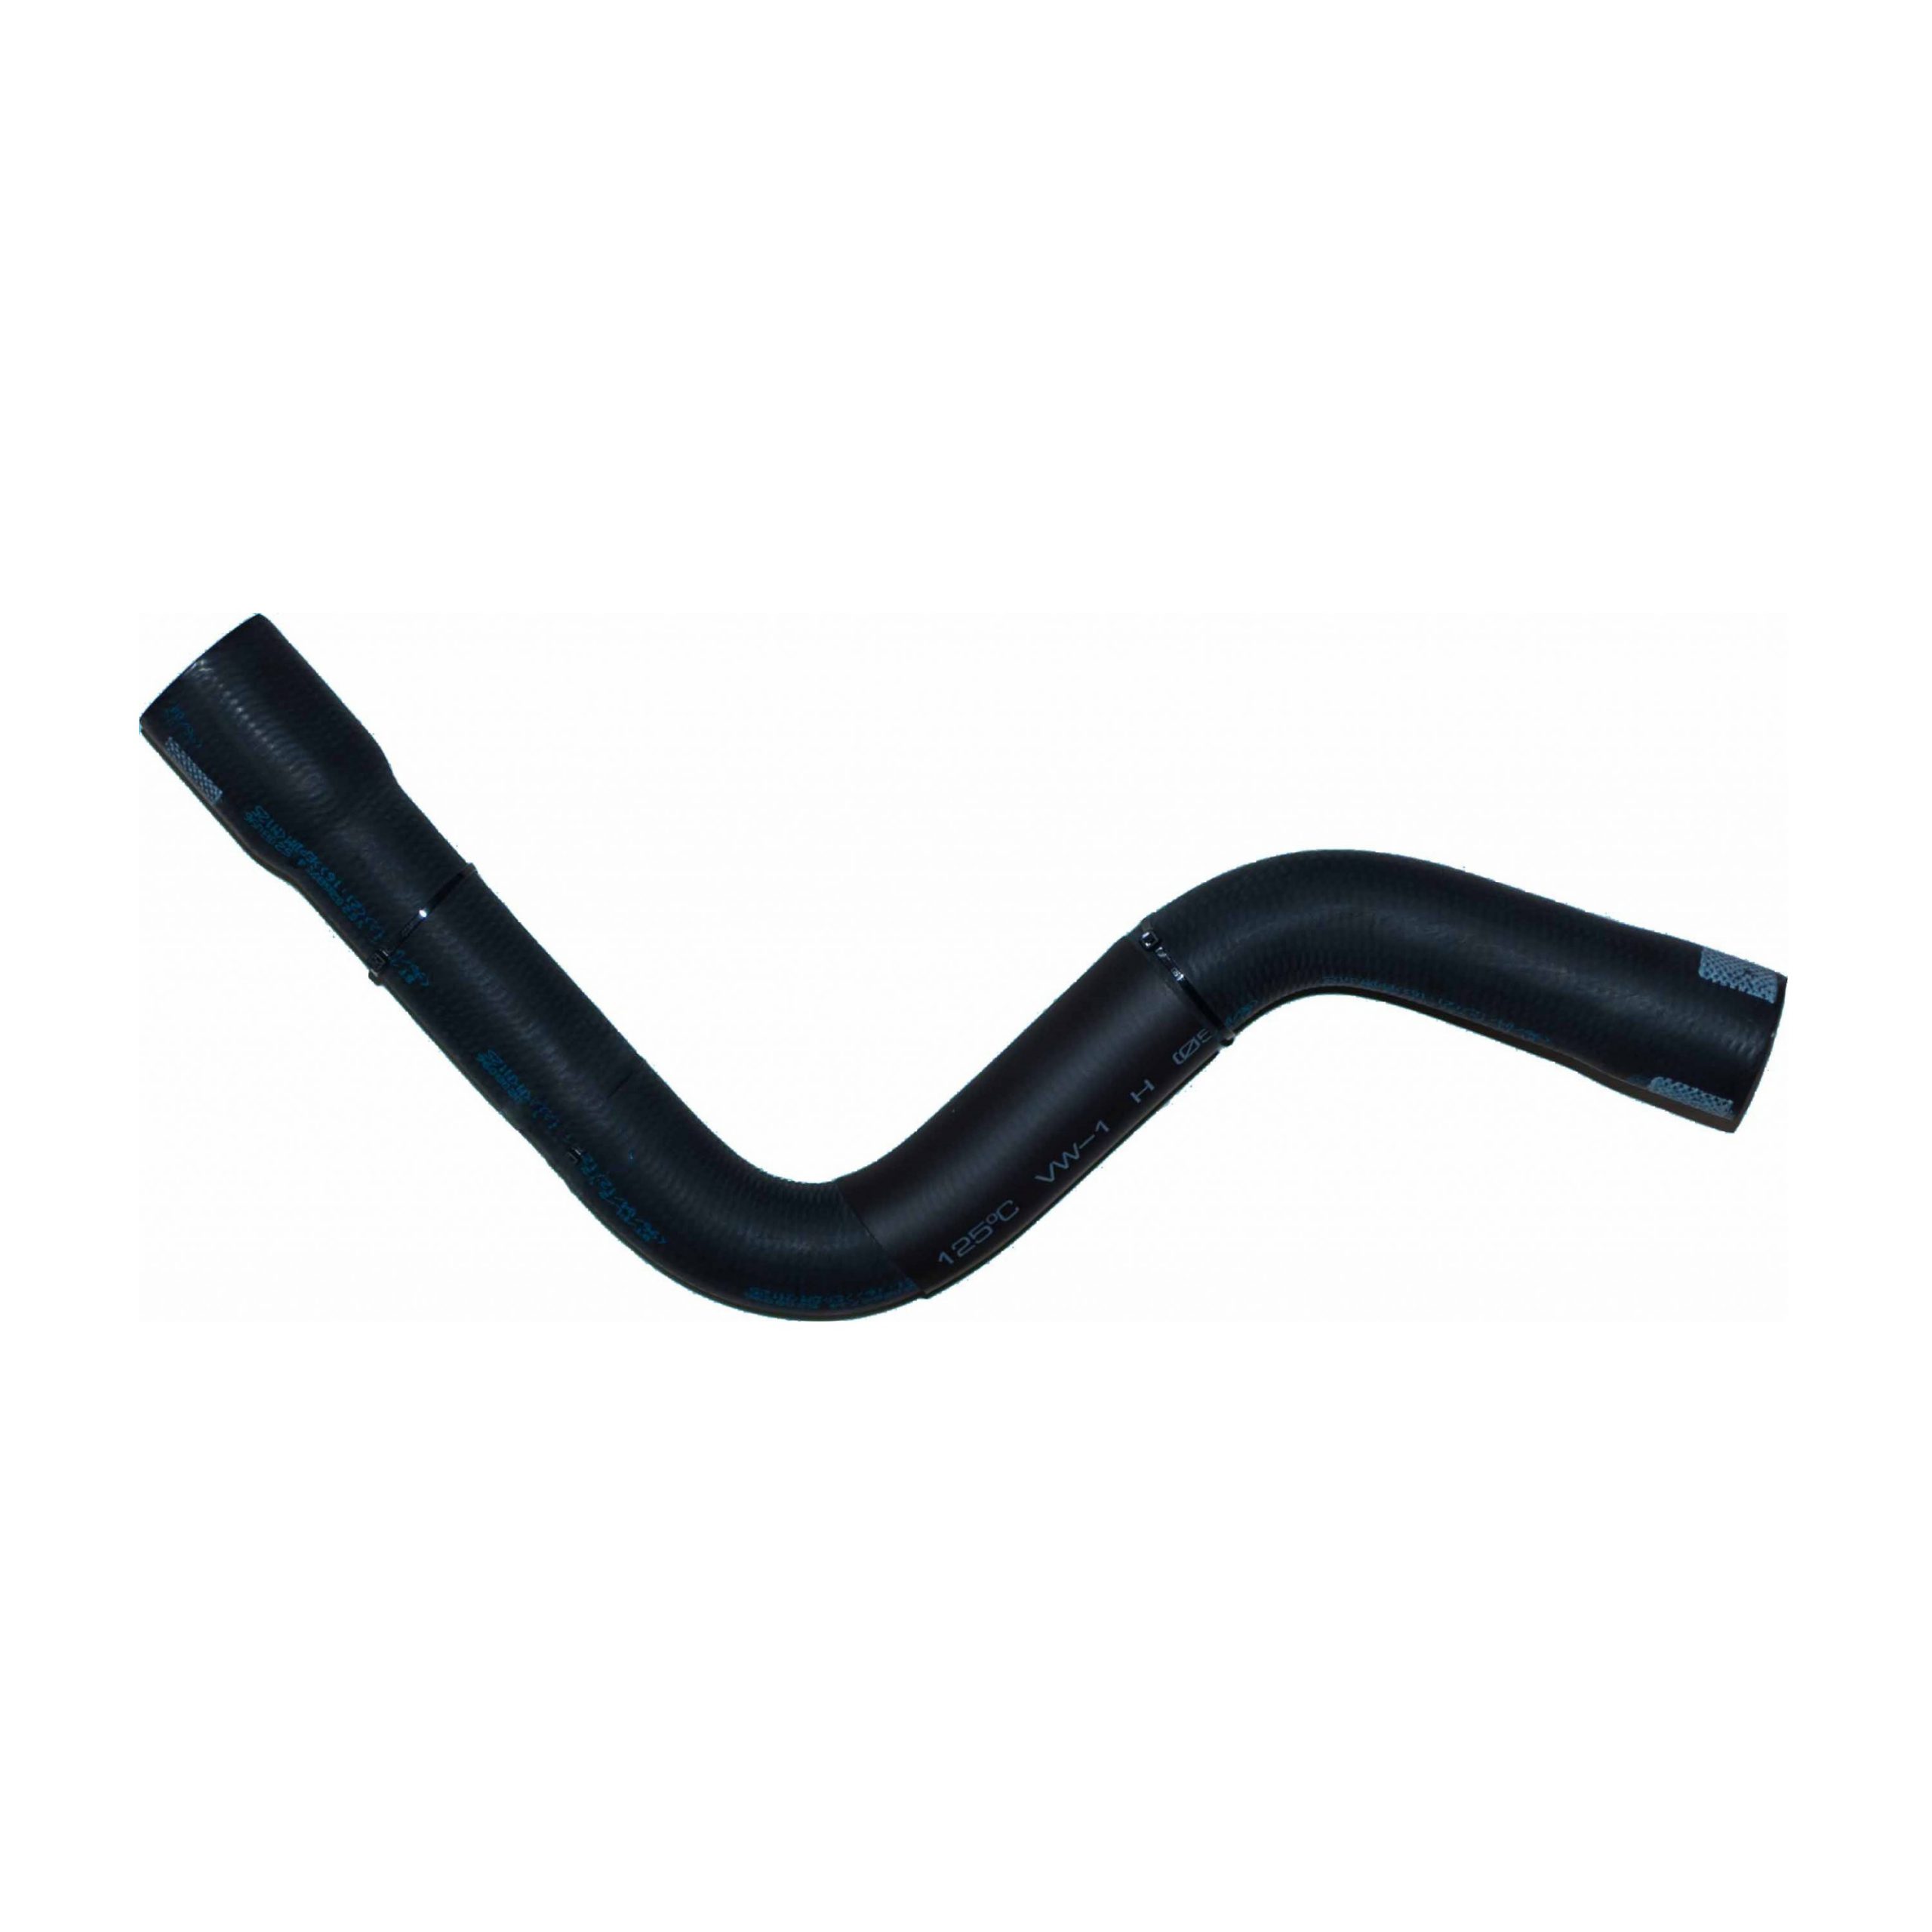 Water inlet hose to the Peugeot 405 classic design radiator